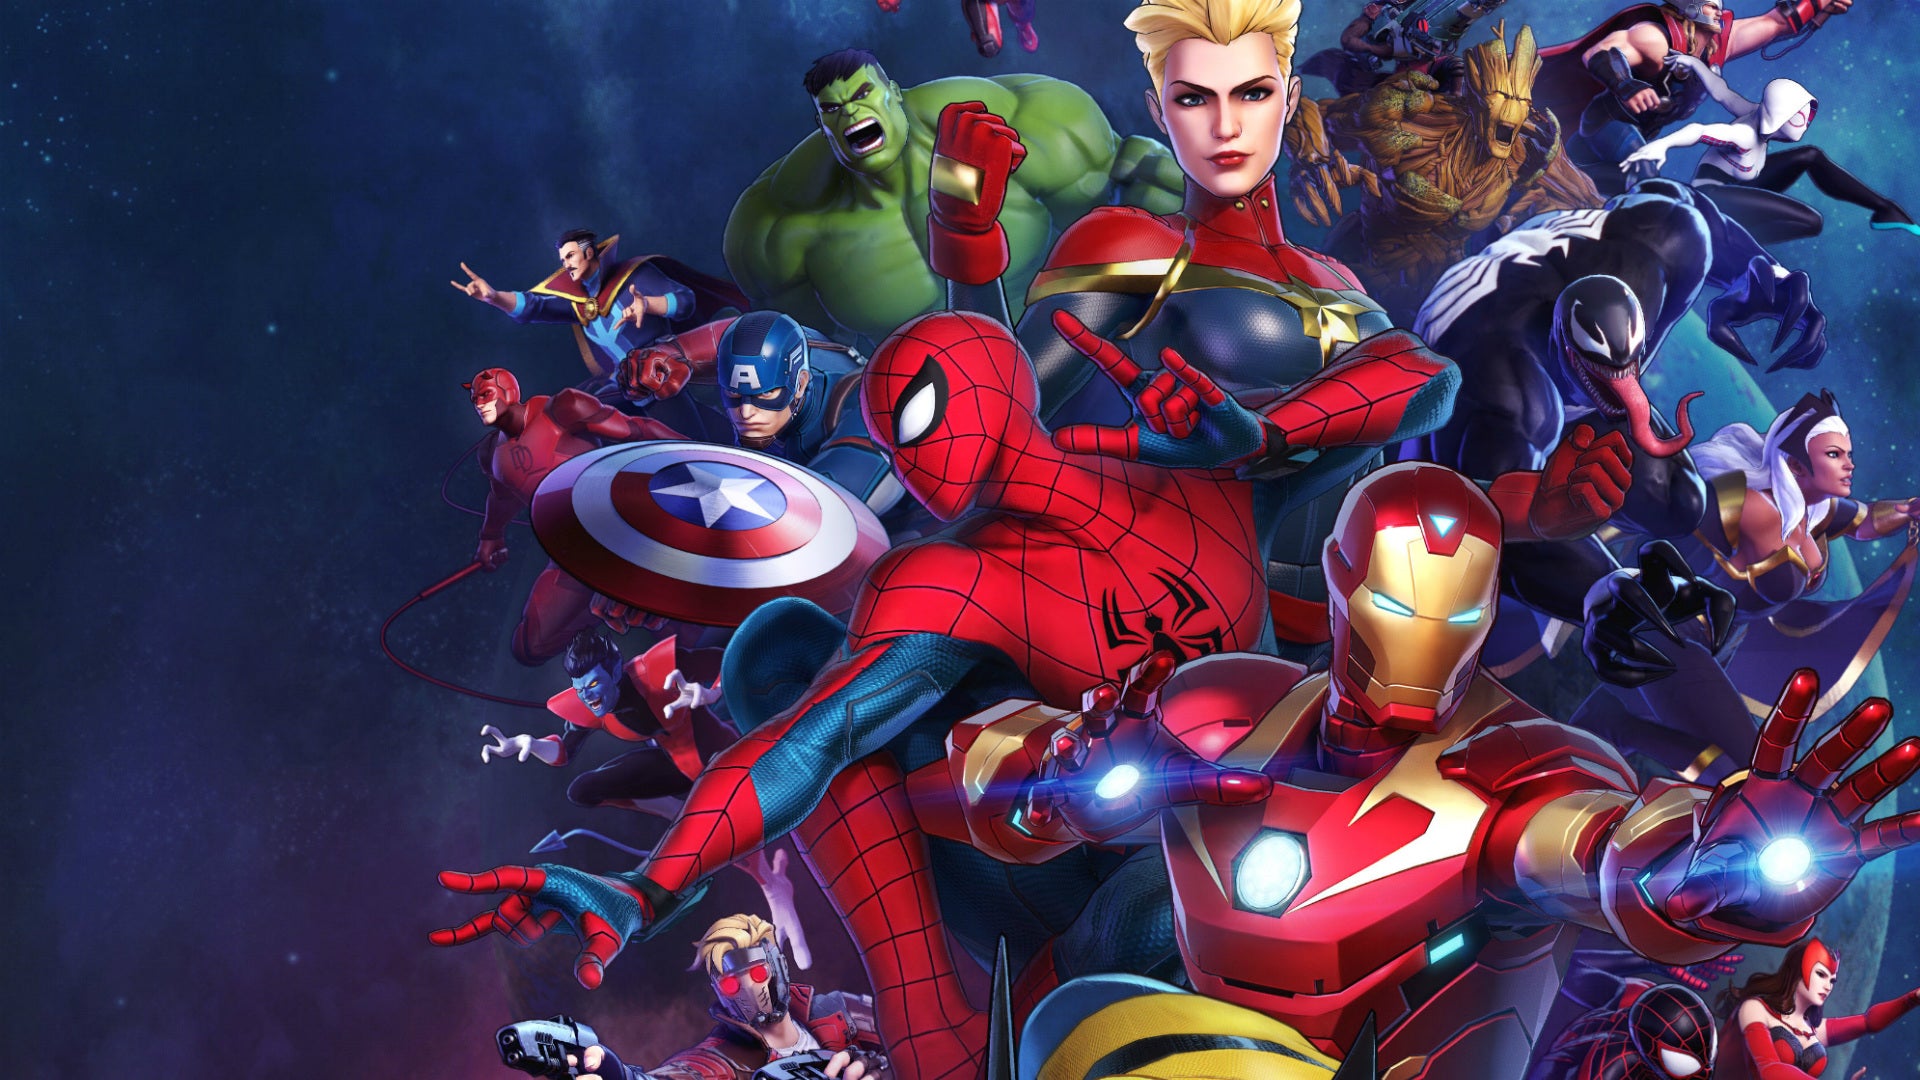 Image for Marvel Ultimate Alliance 3 Costumes: How to Unlock and Change Outfits